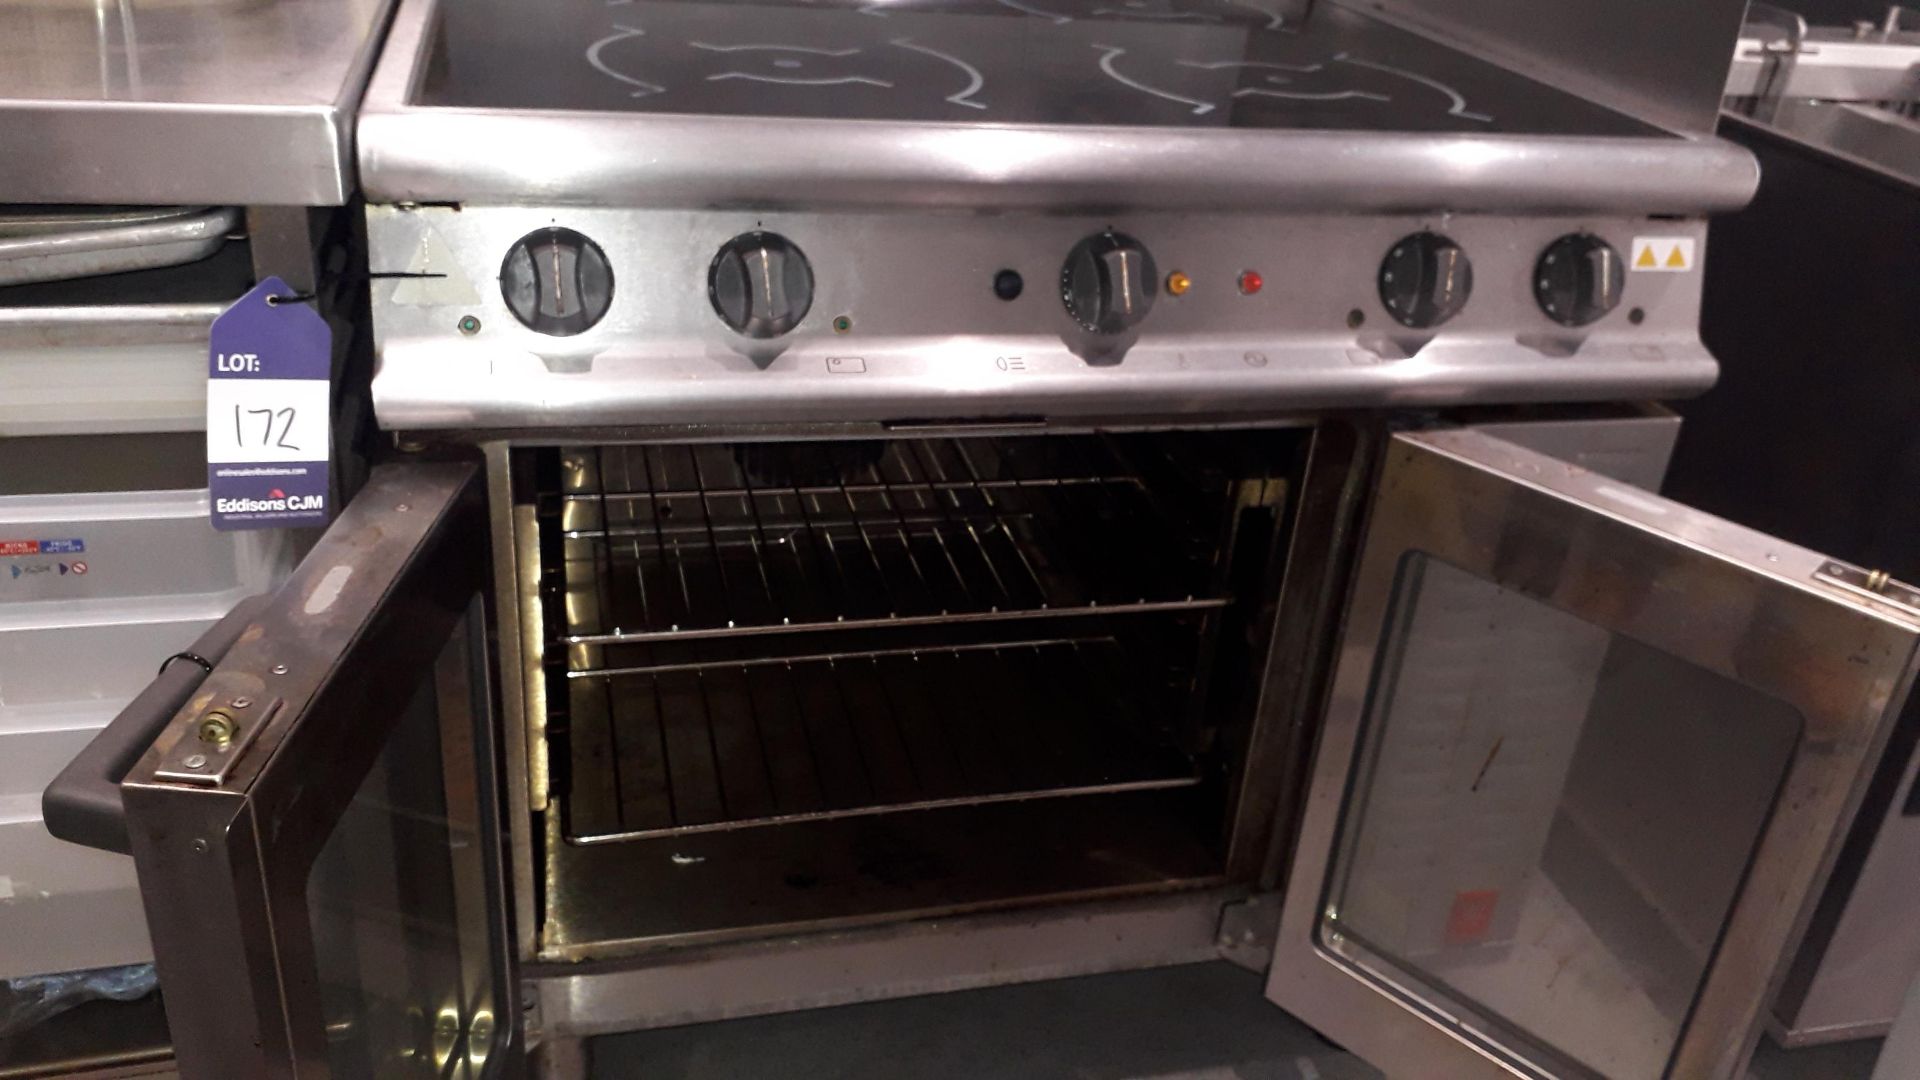 Falcon E3913i Dominator Plus Induction Oven Serial Number F592512 415v, Located at First Floor, - Image 2 of 5